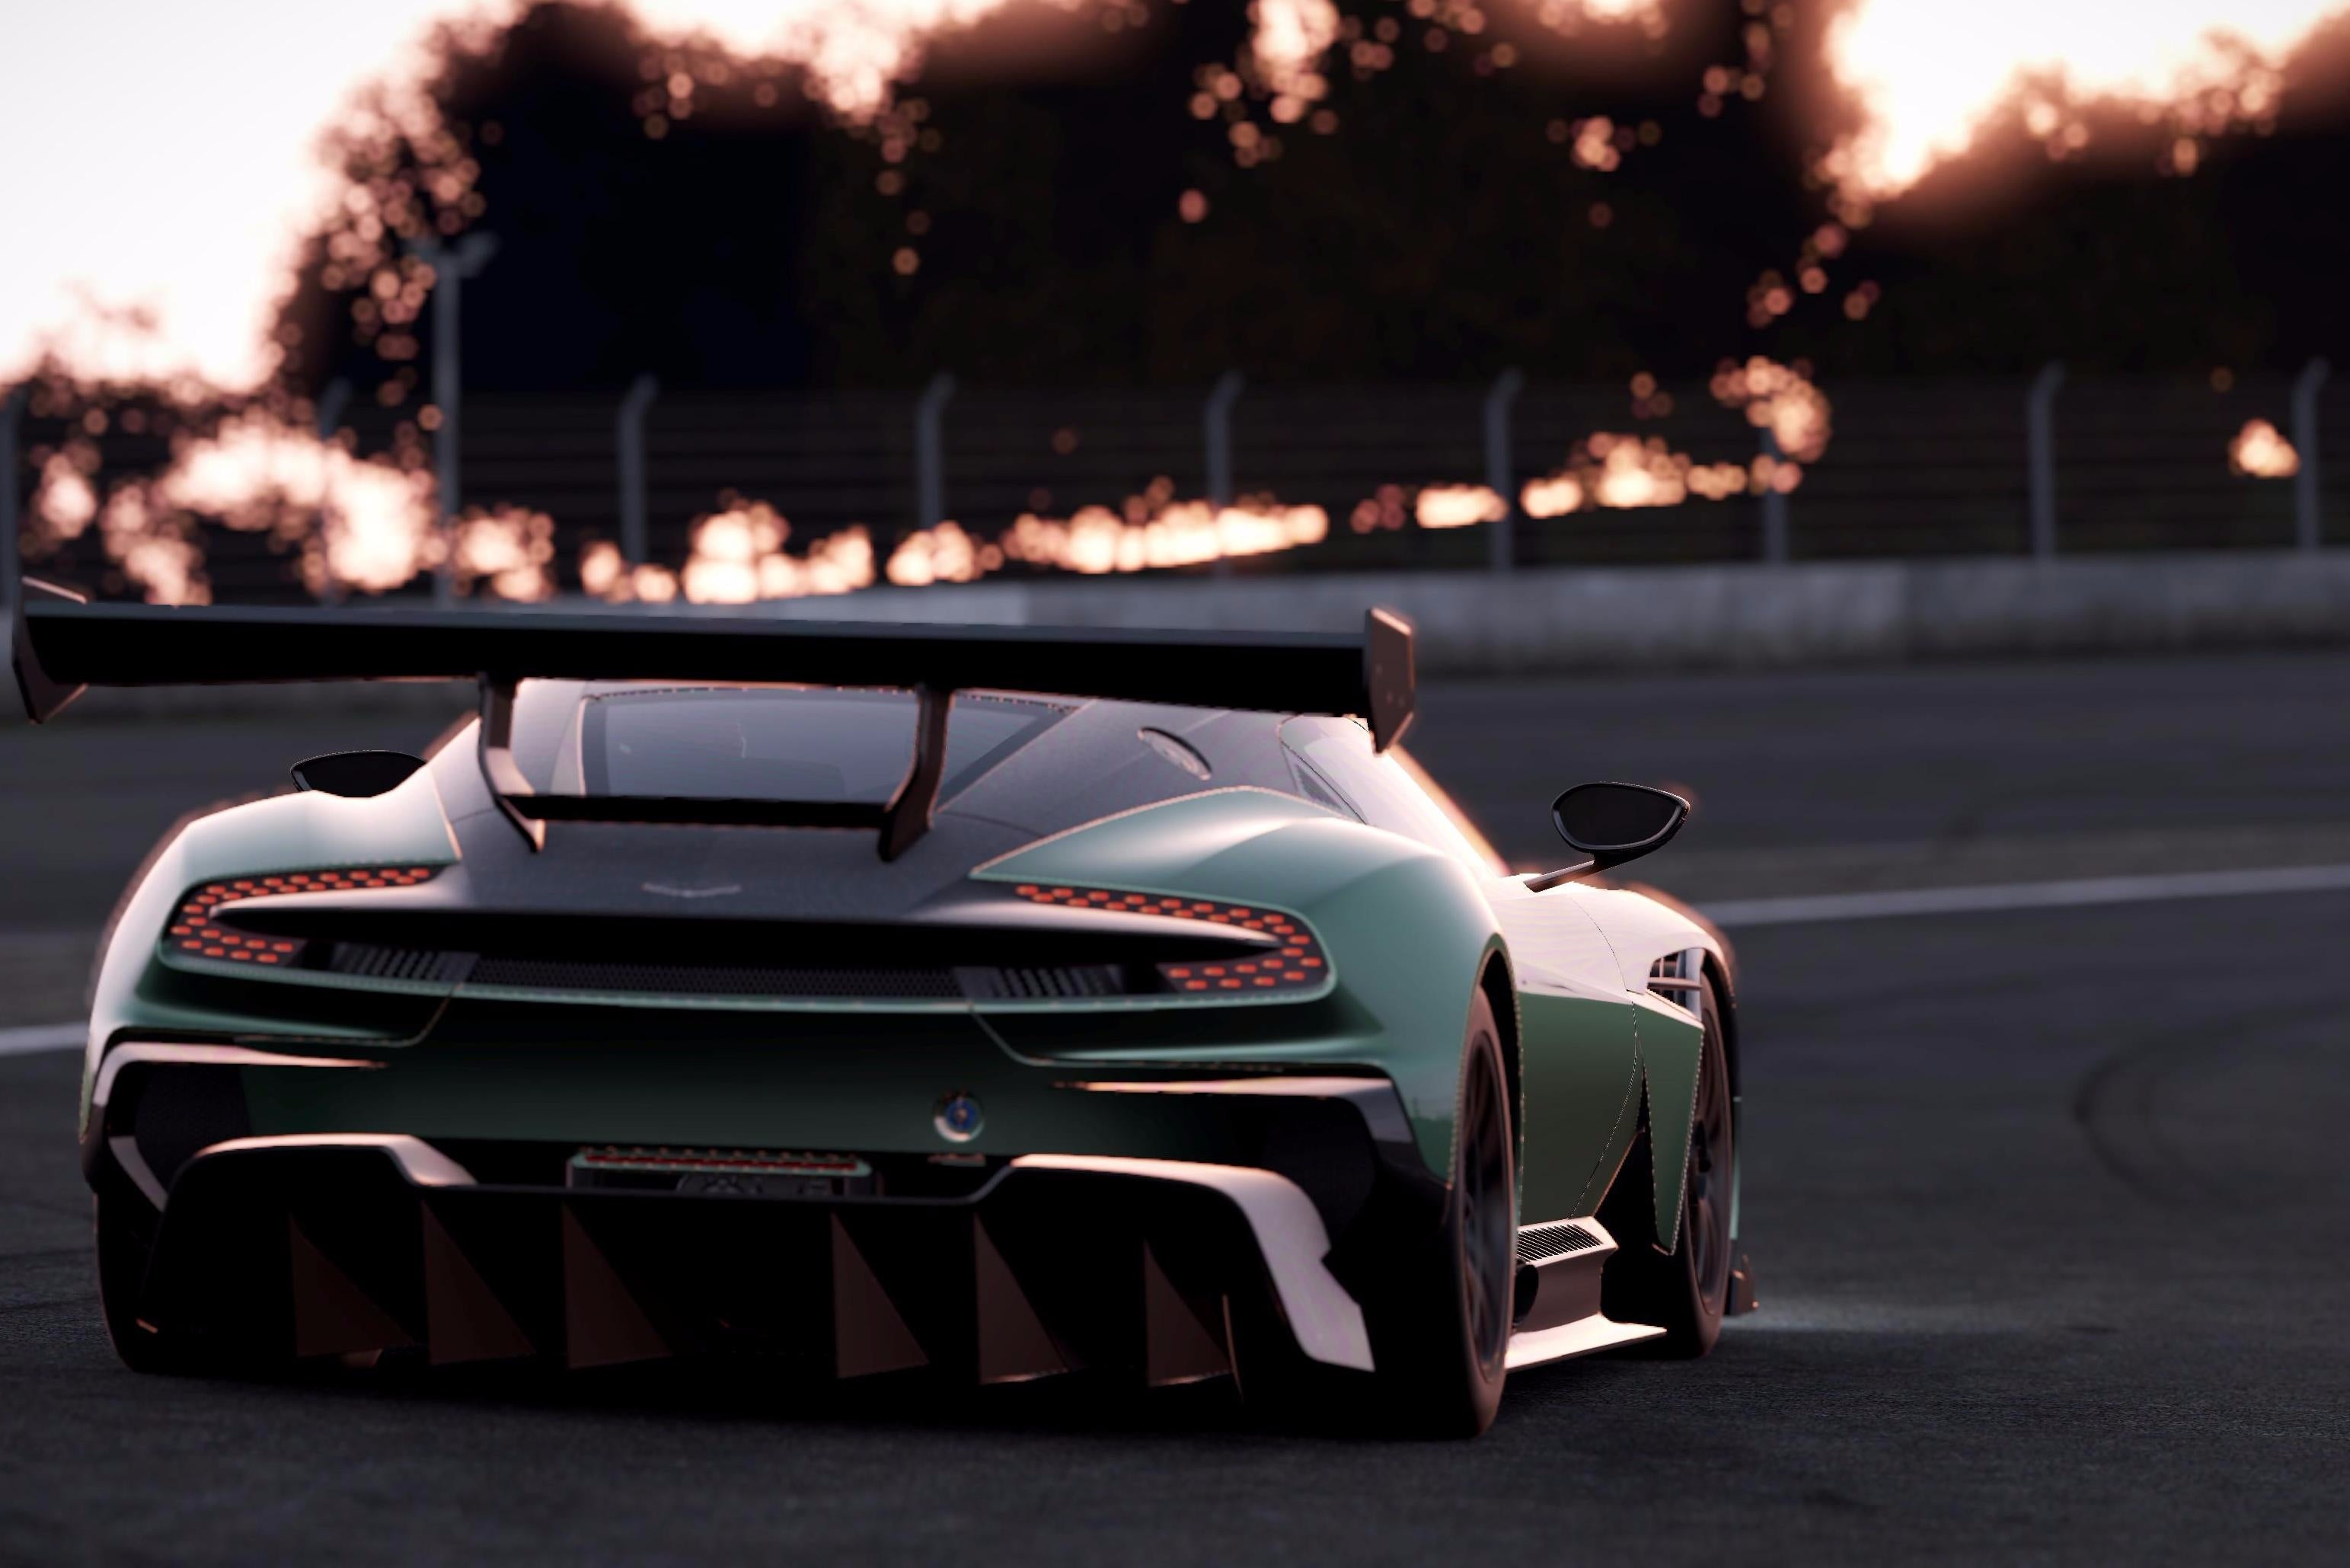 Image for Project Cars 2 officially breaks cover, will support 12K and VR